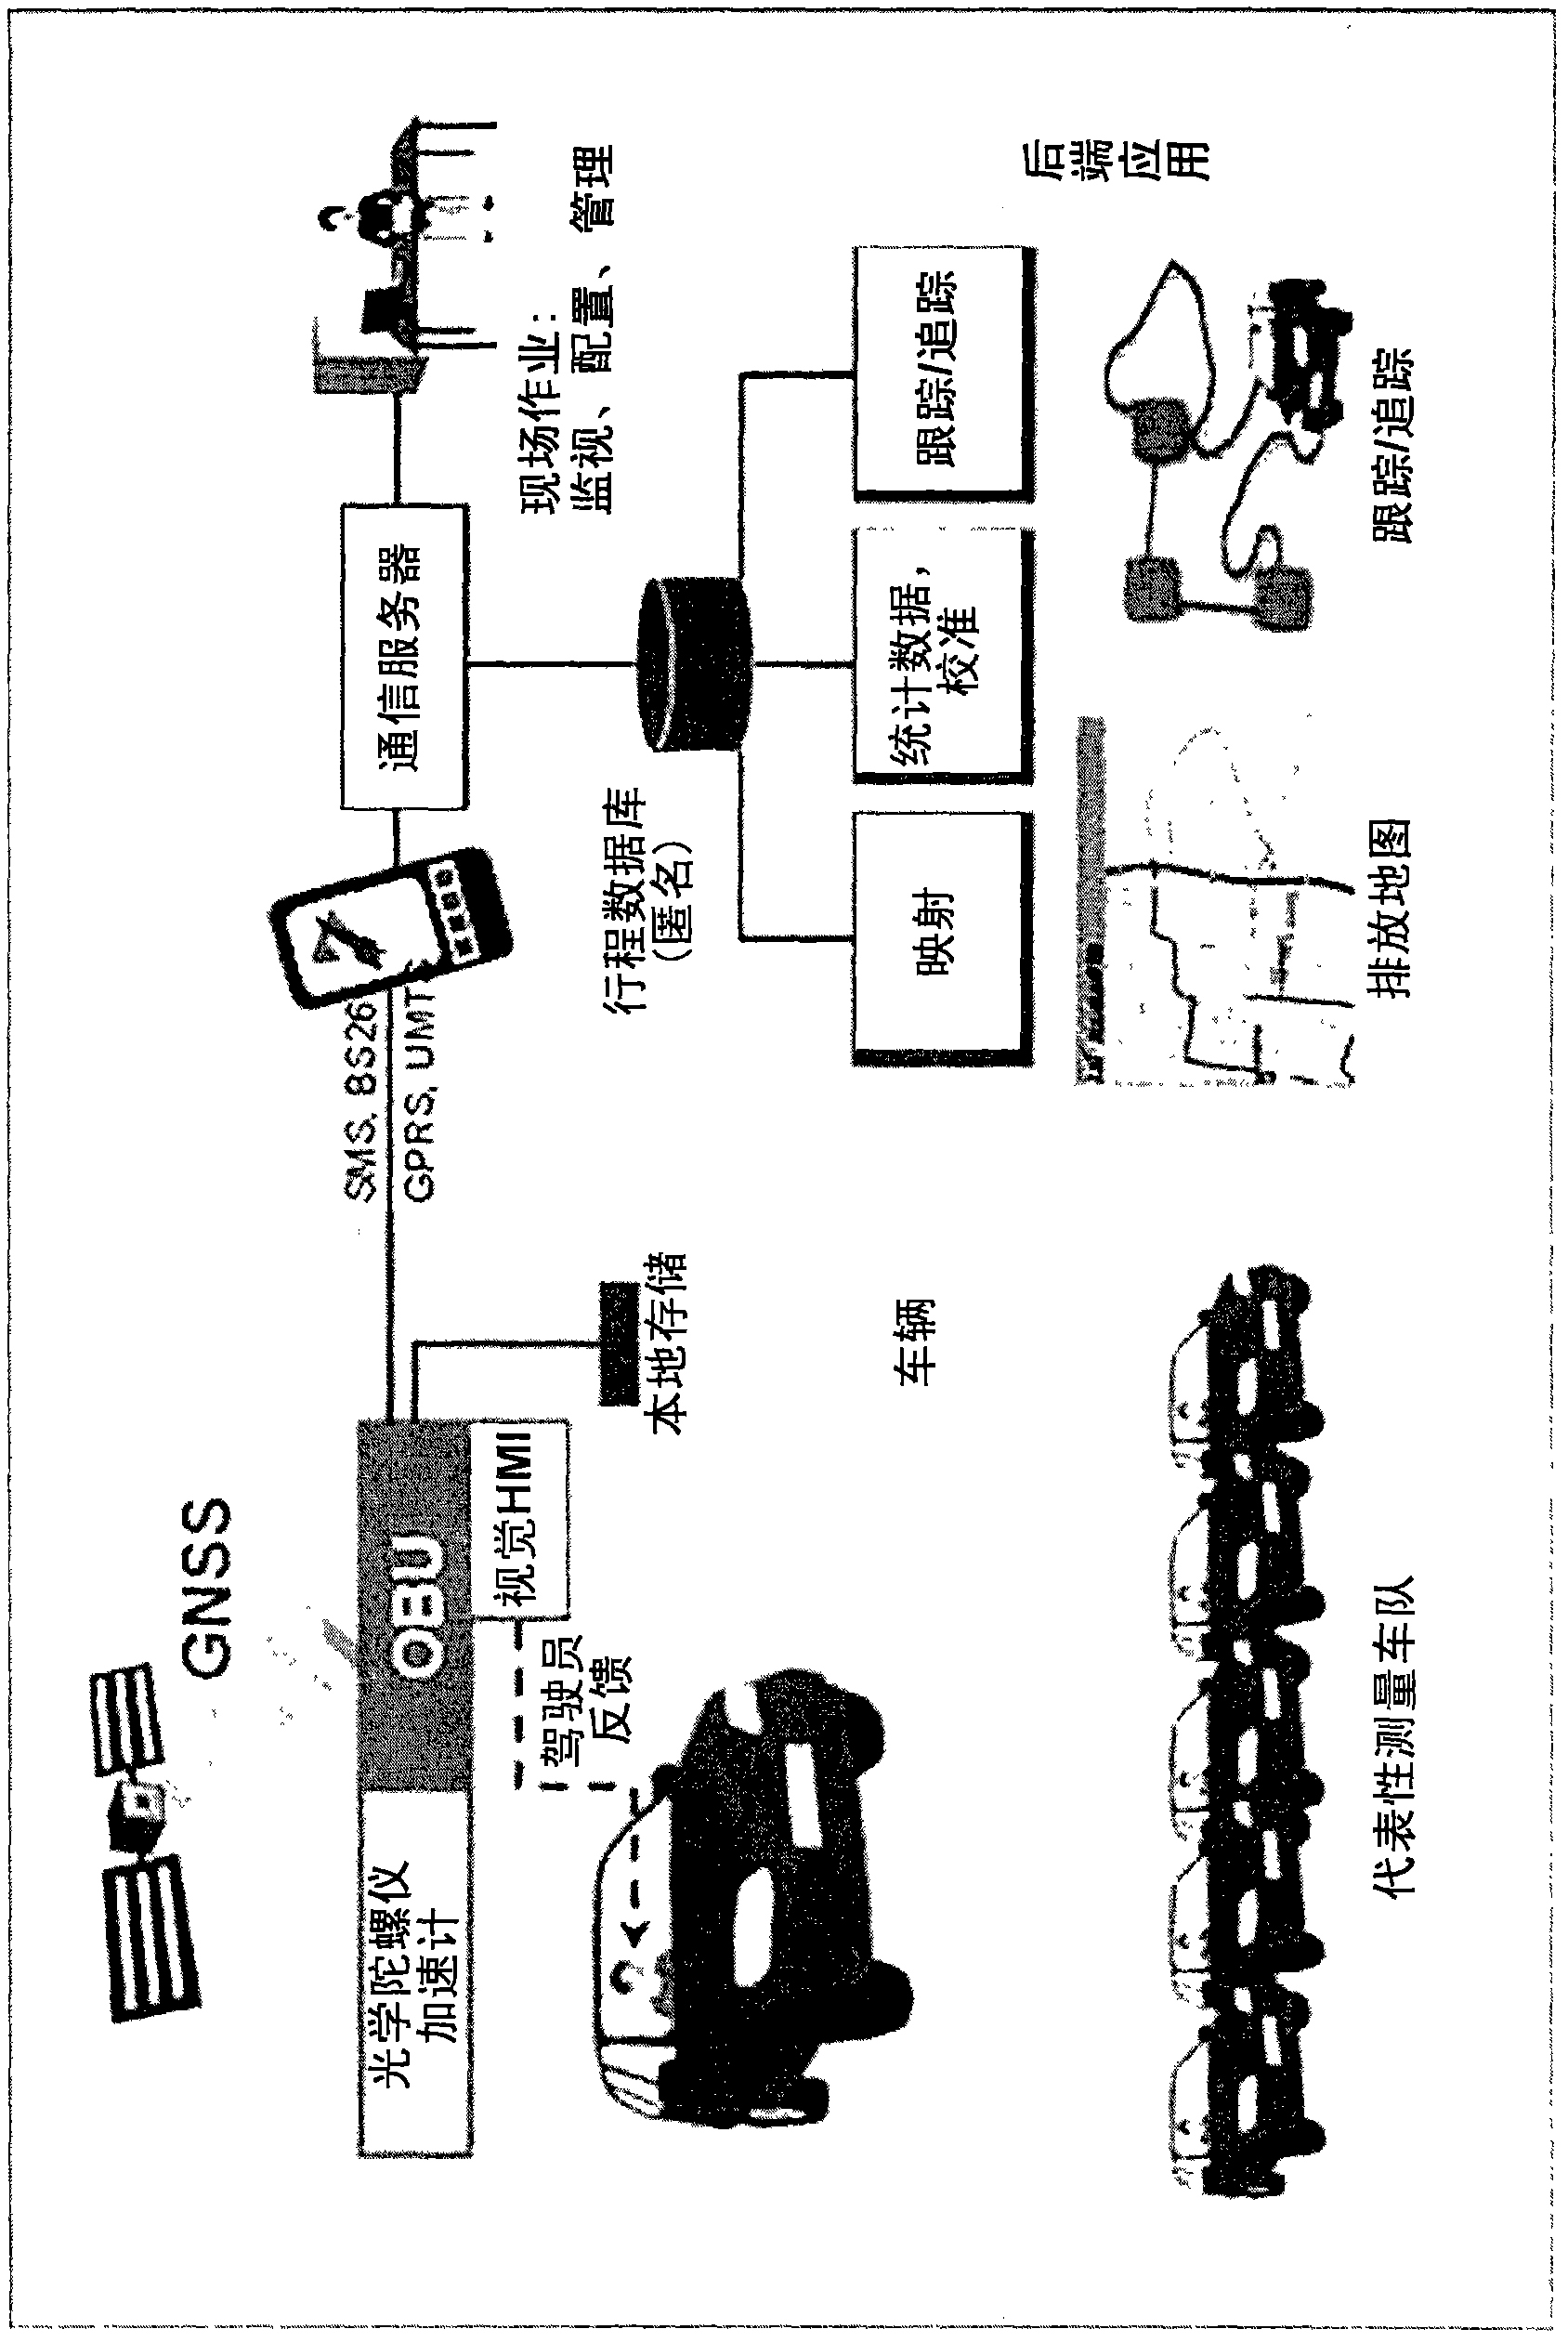 Method and system for traffic control and traffic emission control